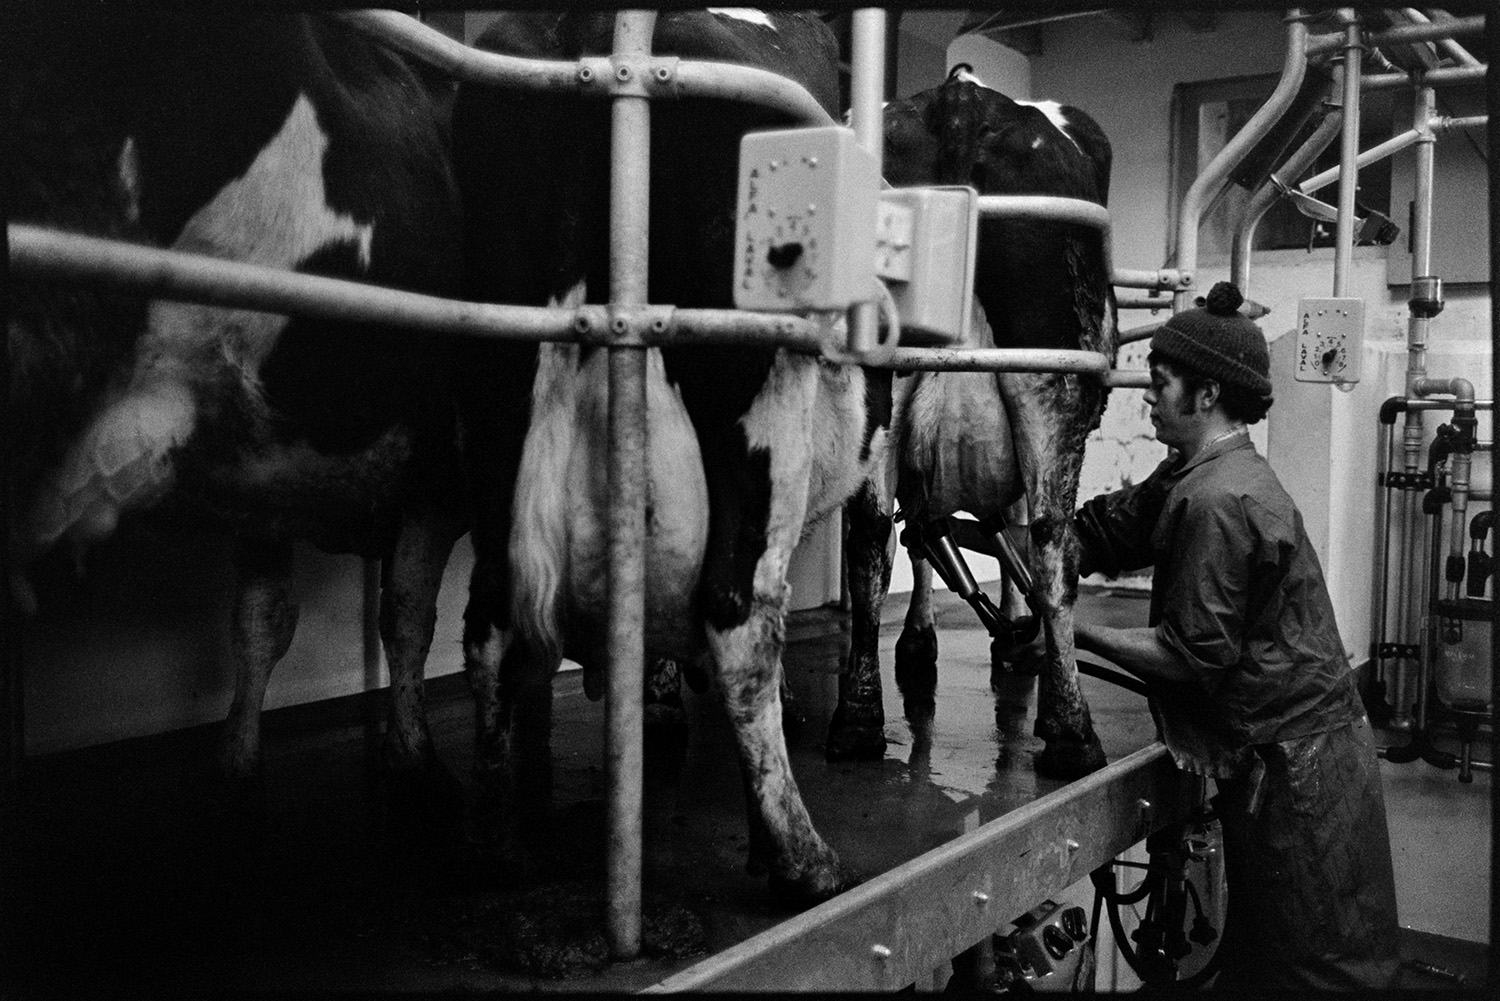 Milking parlour. 
[David Ward milking cows with a milking machine in the milking parlour at Nethercott, Iddesleigh.]